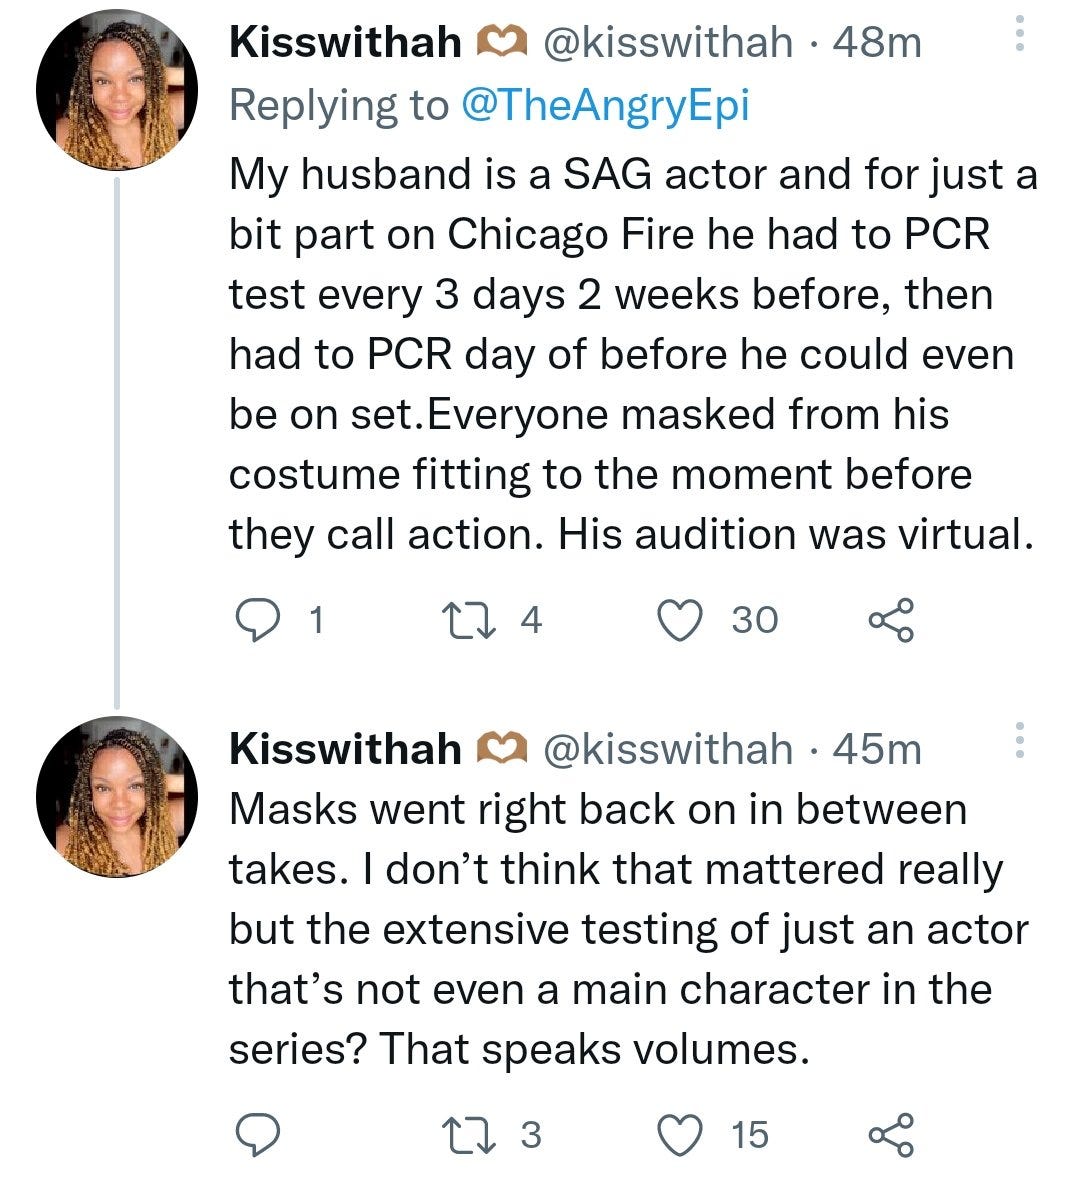 Image@kisswithah Replying to @TheAngryEpi My husband is a SAG actor and for just a bit part on Chicago Fire he had to PCR test every 3 days 2 weeks before, then had to PCR day of before he could even be on set.Everyone masked from his costume fitting to the moment before they call action. His audition was virtual. Masks went right back on in between takes. I don’t think that mattered really but the extensive testing of just an actor that’s not even a main character in the series? That speaks volumes.